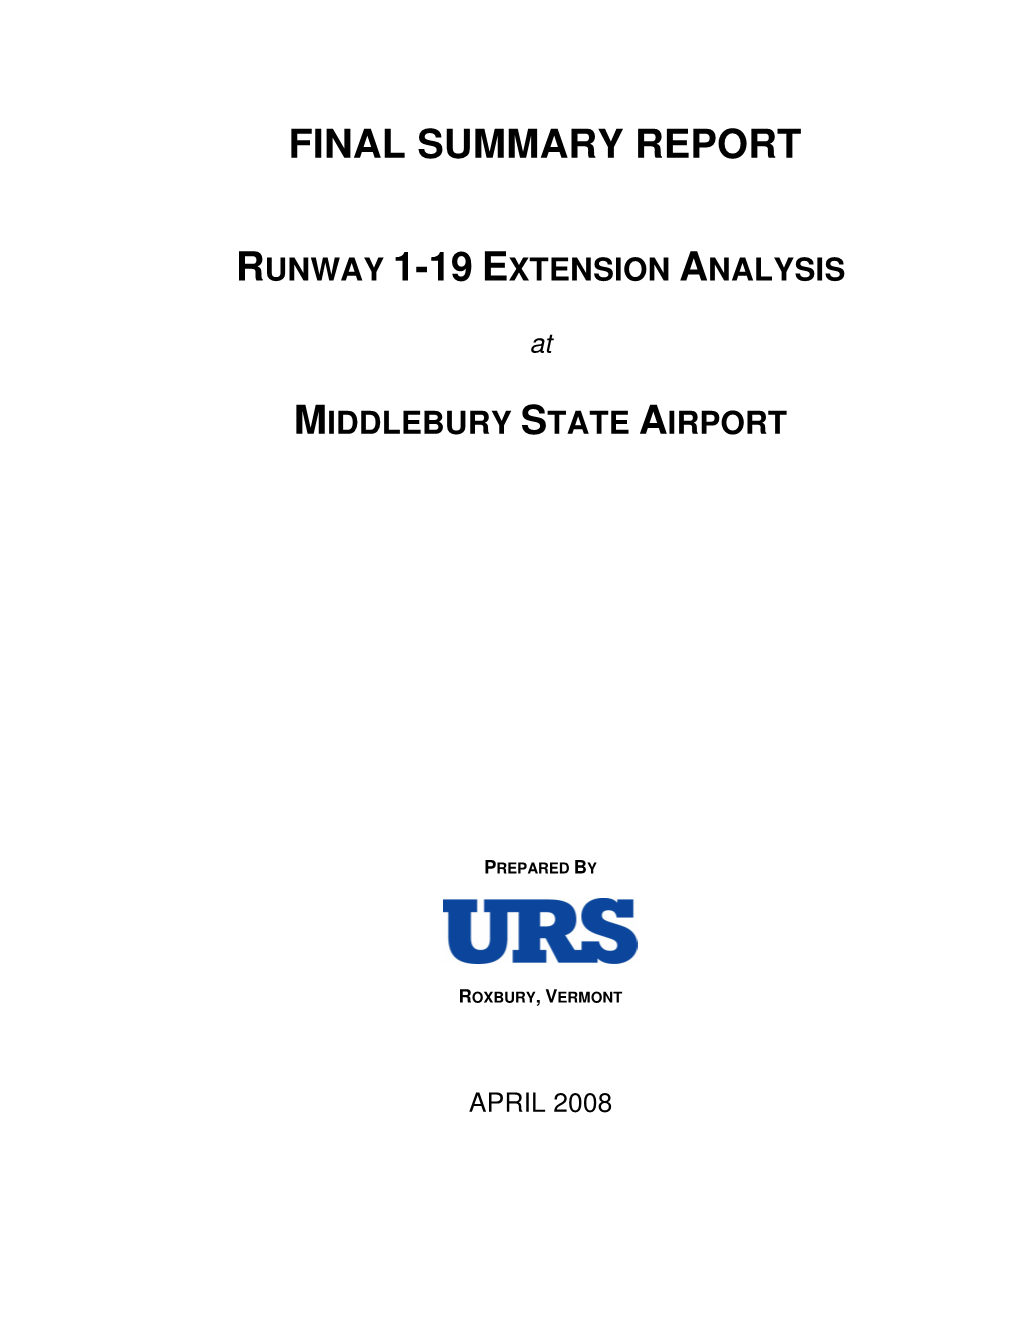 FINAL SUMMARY REPORT RUNWAY 1-19 EXTENSION ANALYSIS at MIDDLEBURY STATE AIRPORT